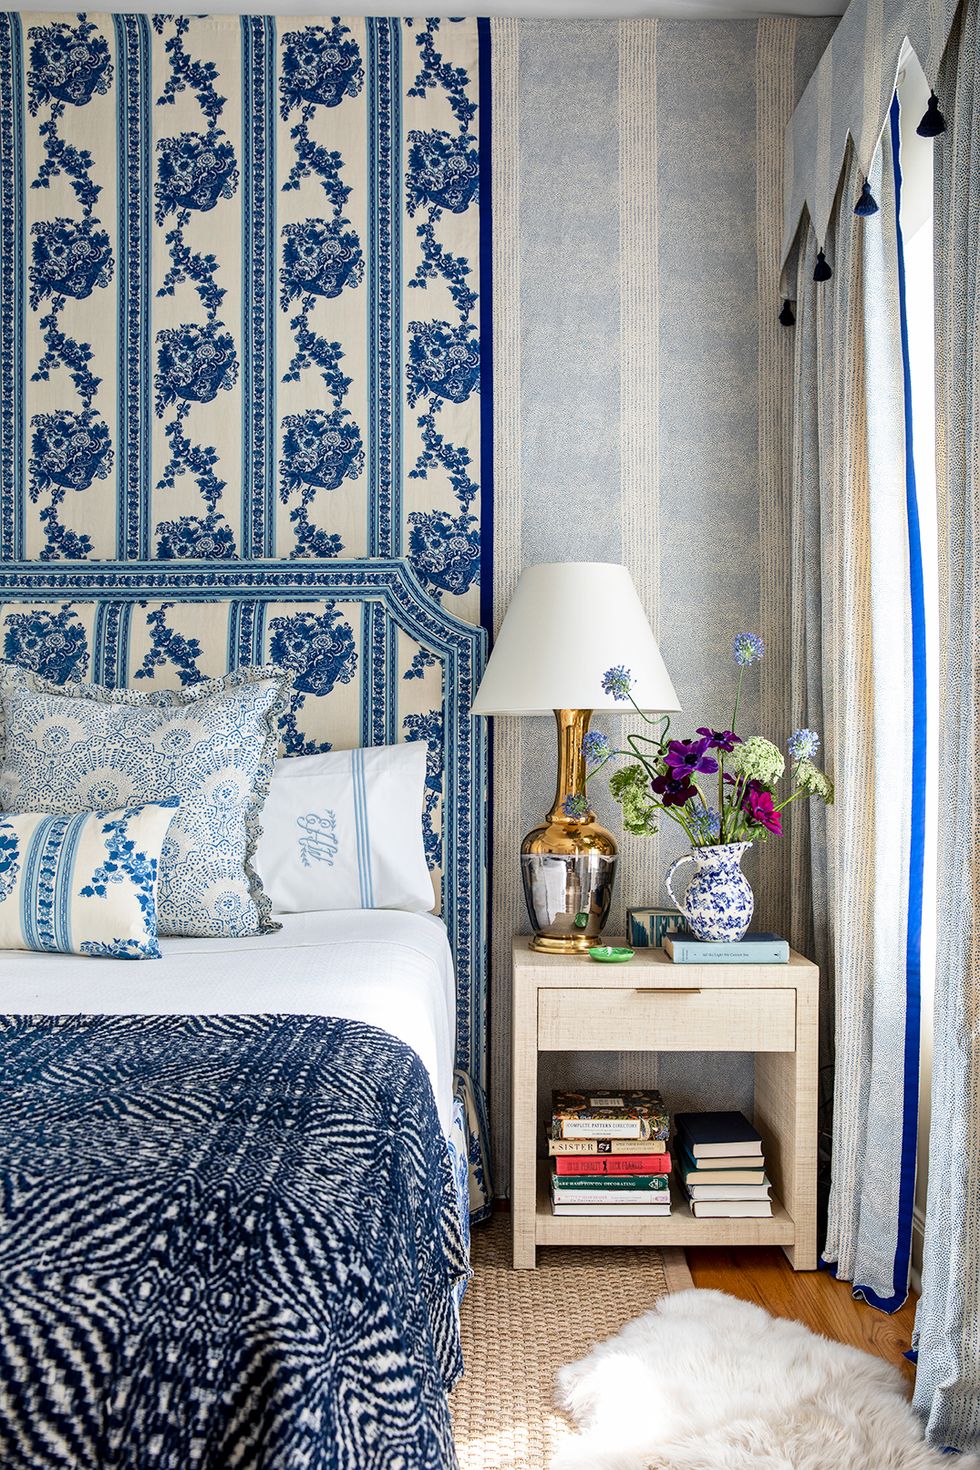 26 Wall Covering Ideas to Make Your Rooms Stand Out